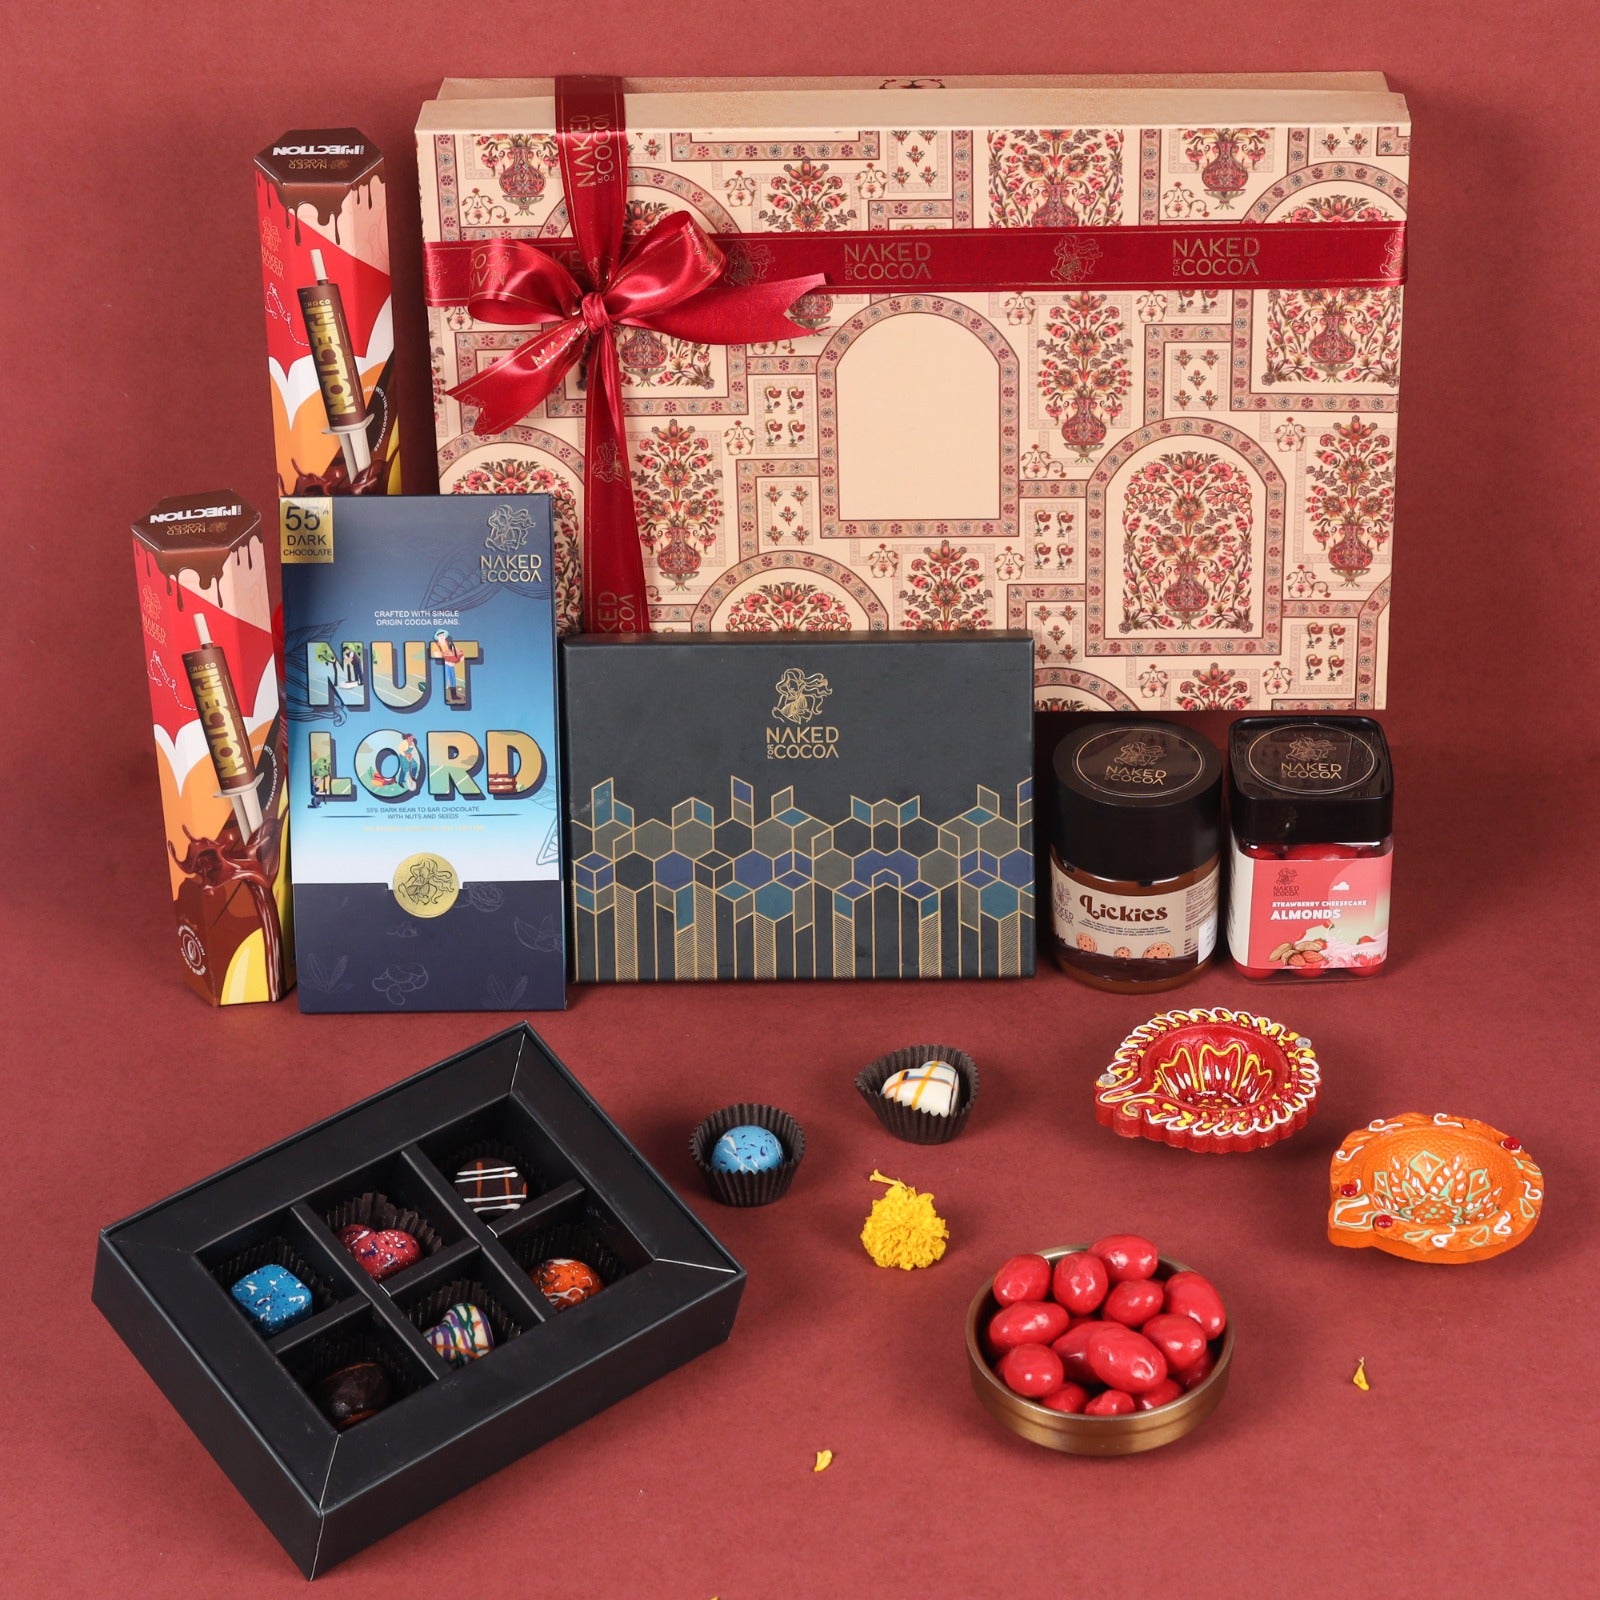 Diwali Special Gourmet Hamper - Bean to Bar Chocolate, Choco Injections, Chocolate Bon Bons, Nut Dragees, Cookie Lickies, and Handmade Diyas